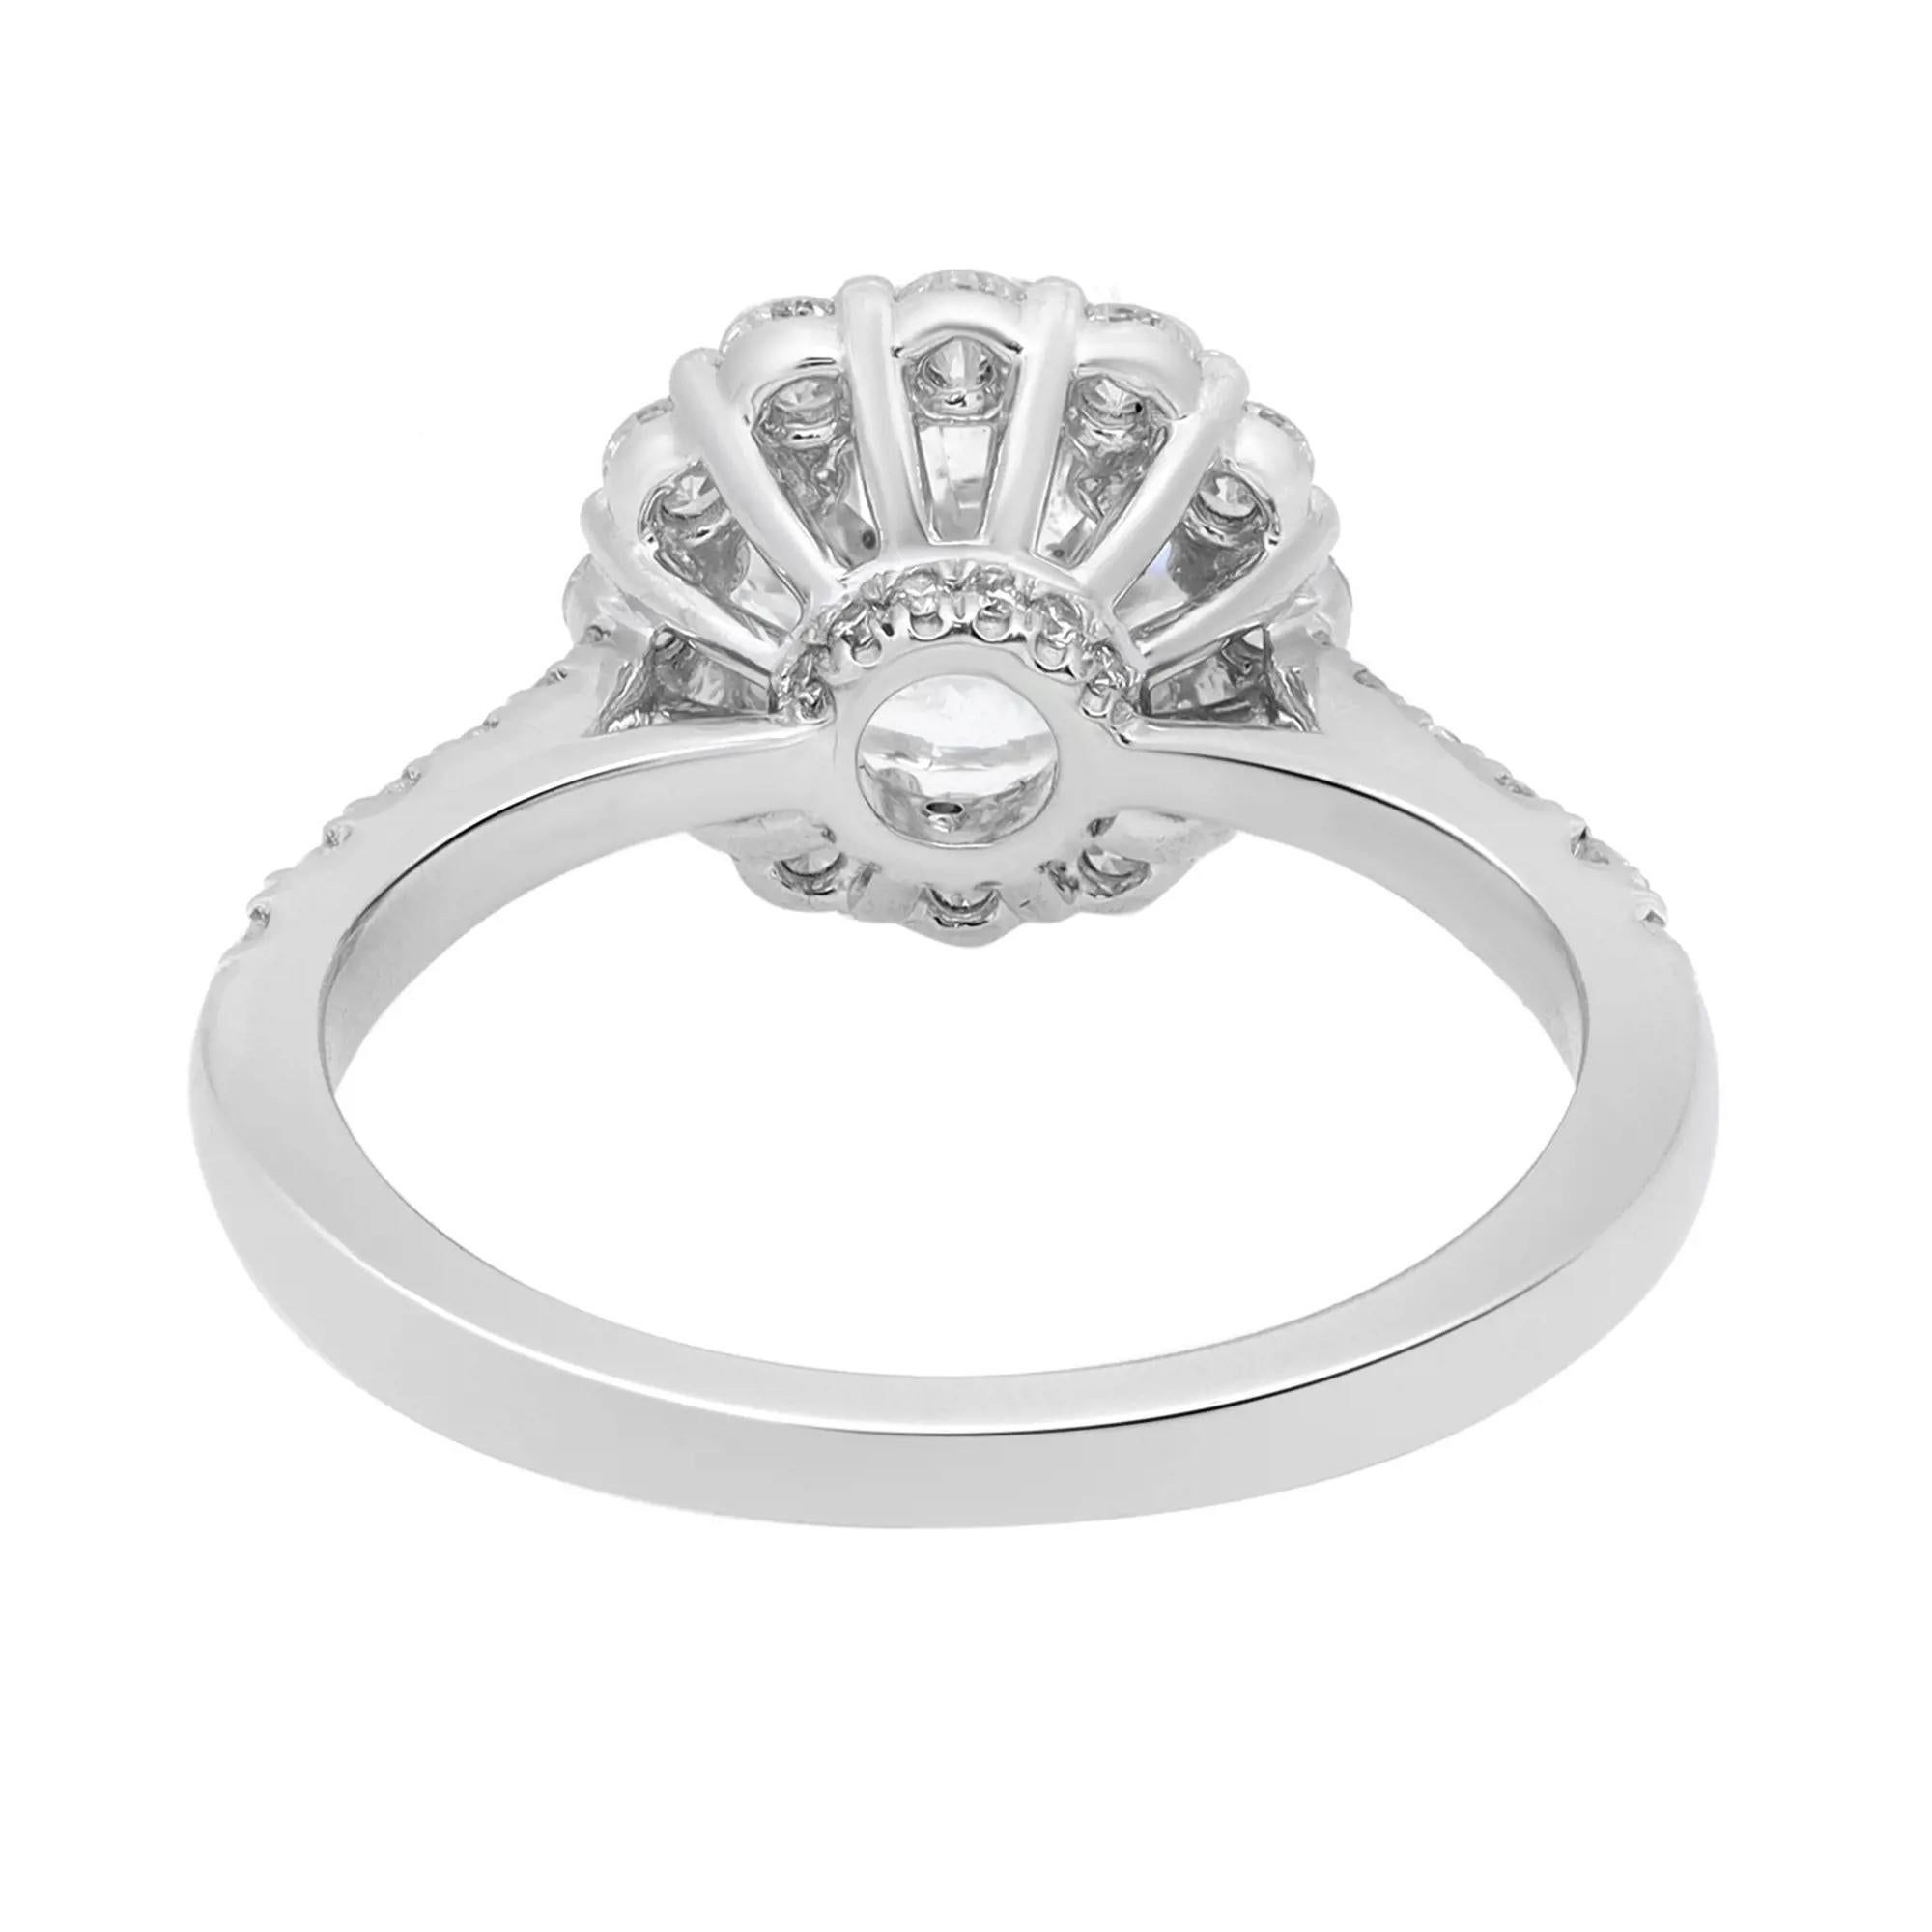 1.71 Carat Prong Set Round Cut Diamond Halo Engagement Ring 18k White Gold In New Condition For Sale In New York, NY